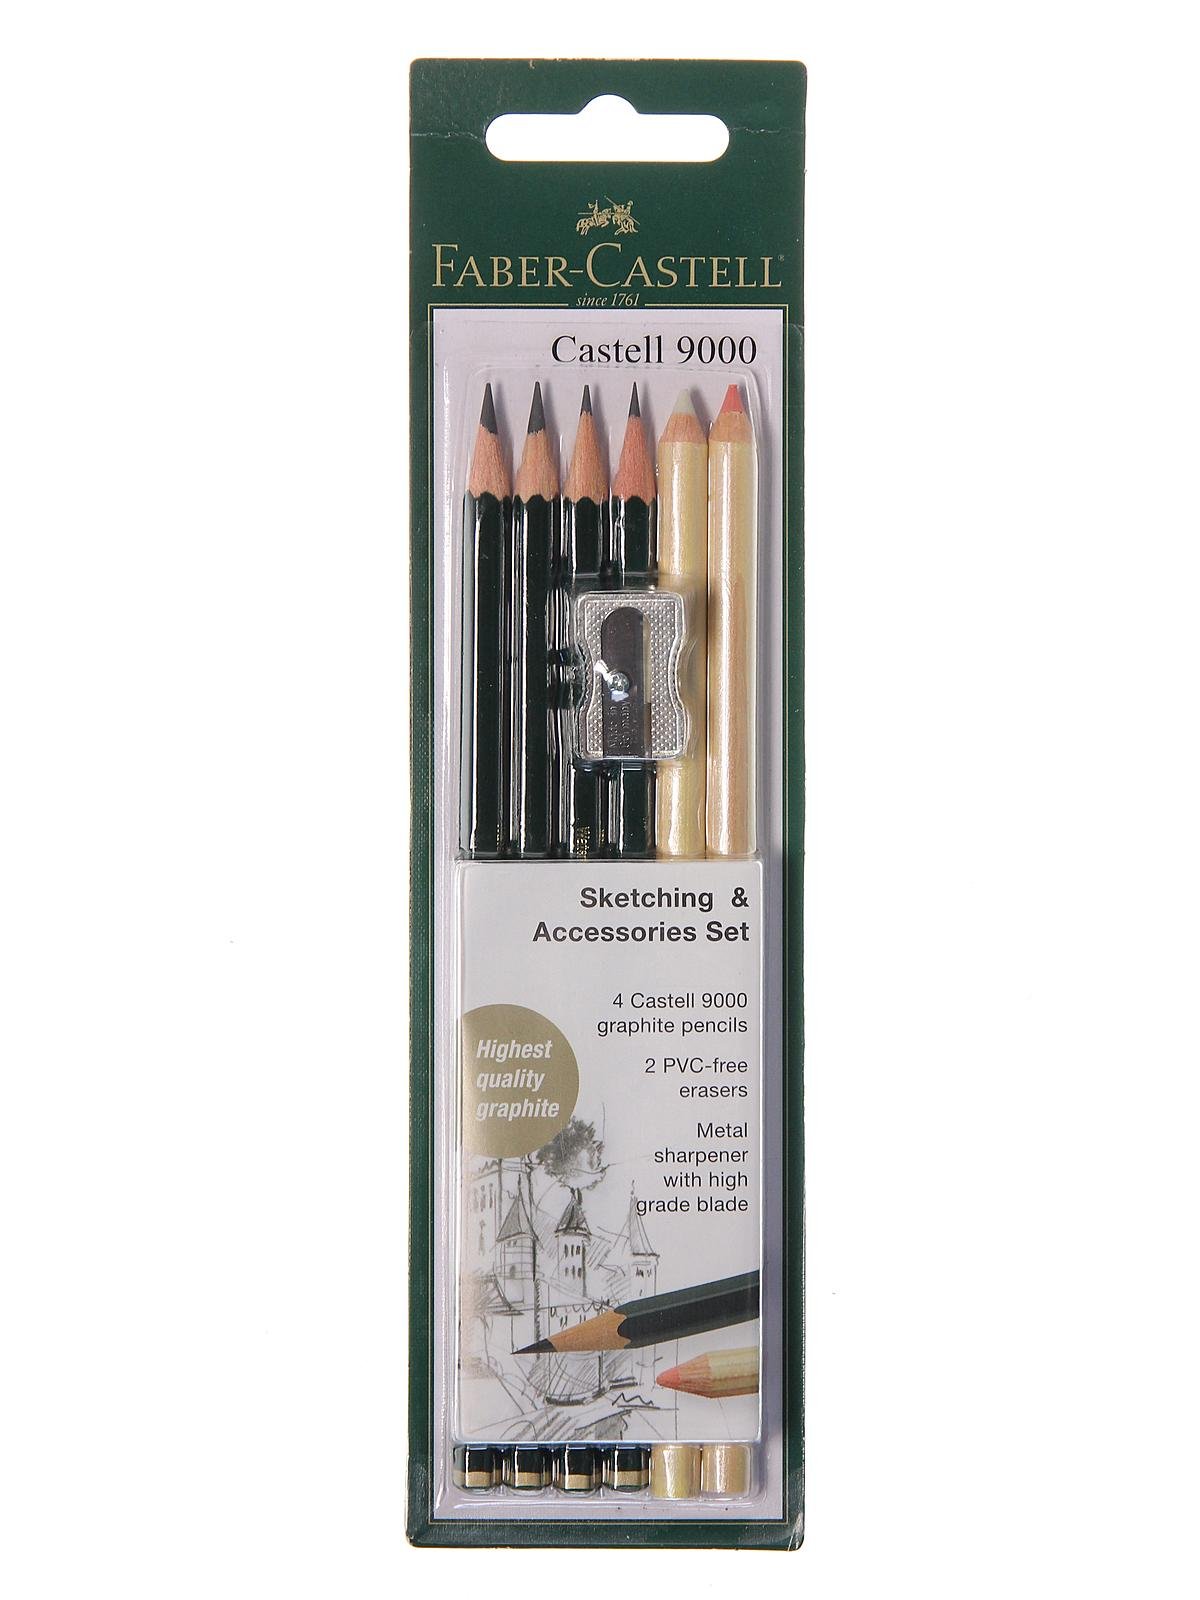 Faber-Castell Pencils, Castell 9000 Artist Graphite 6b Pencils for Sketch, Drawing, Shading, Art Supplies - Box of 12